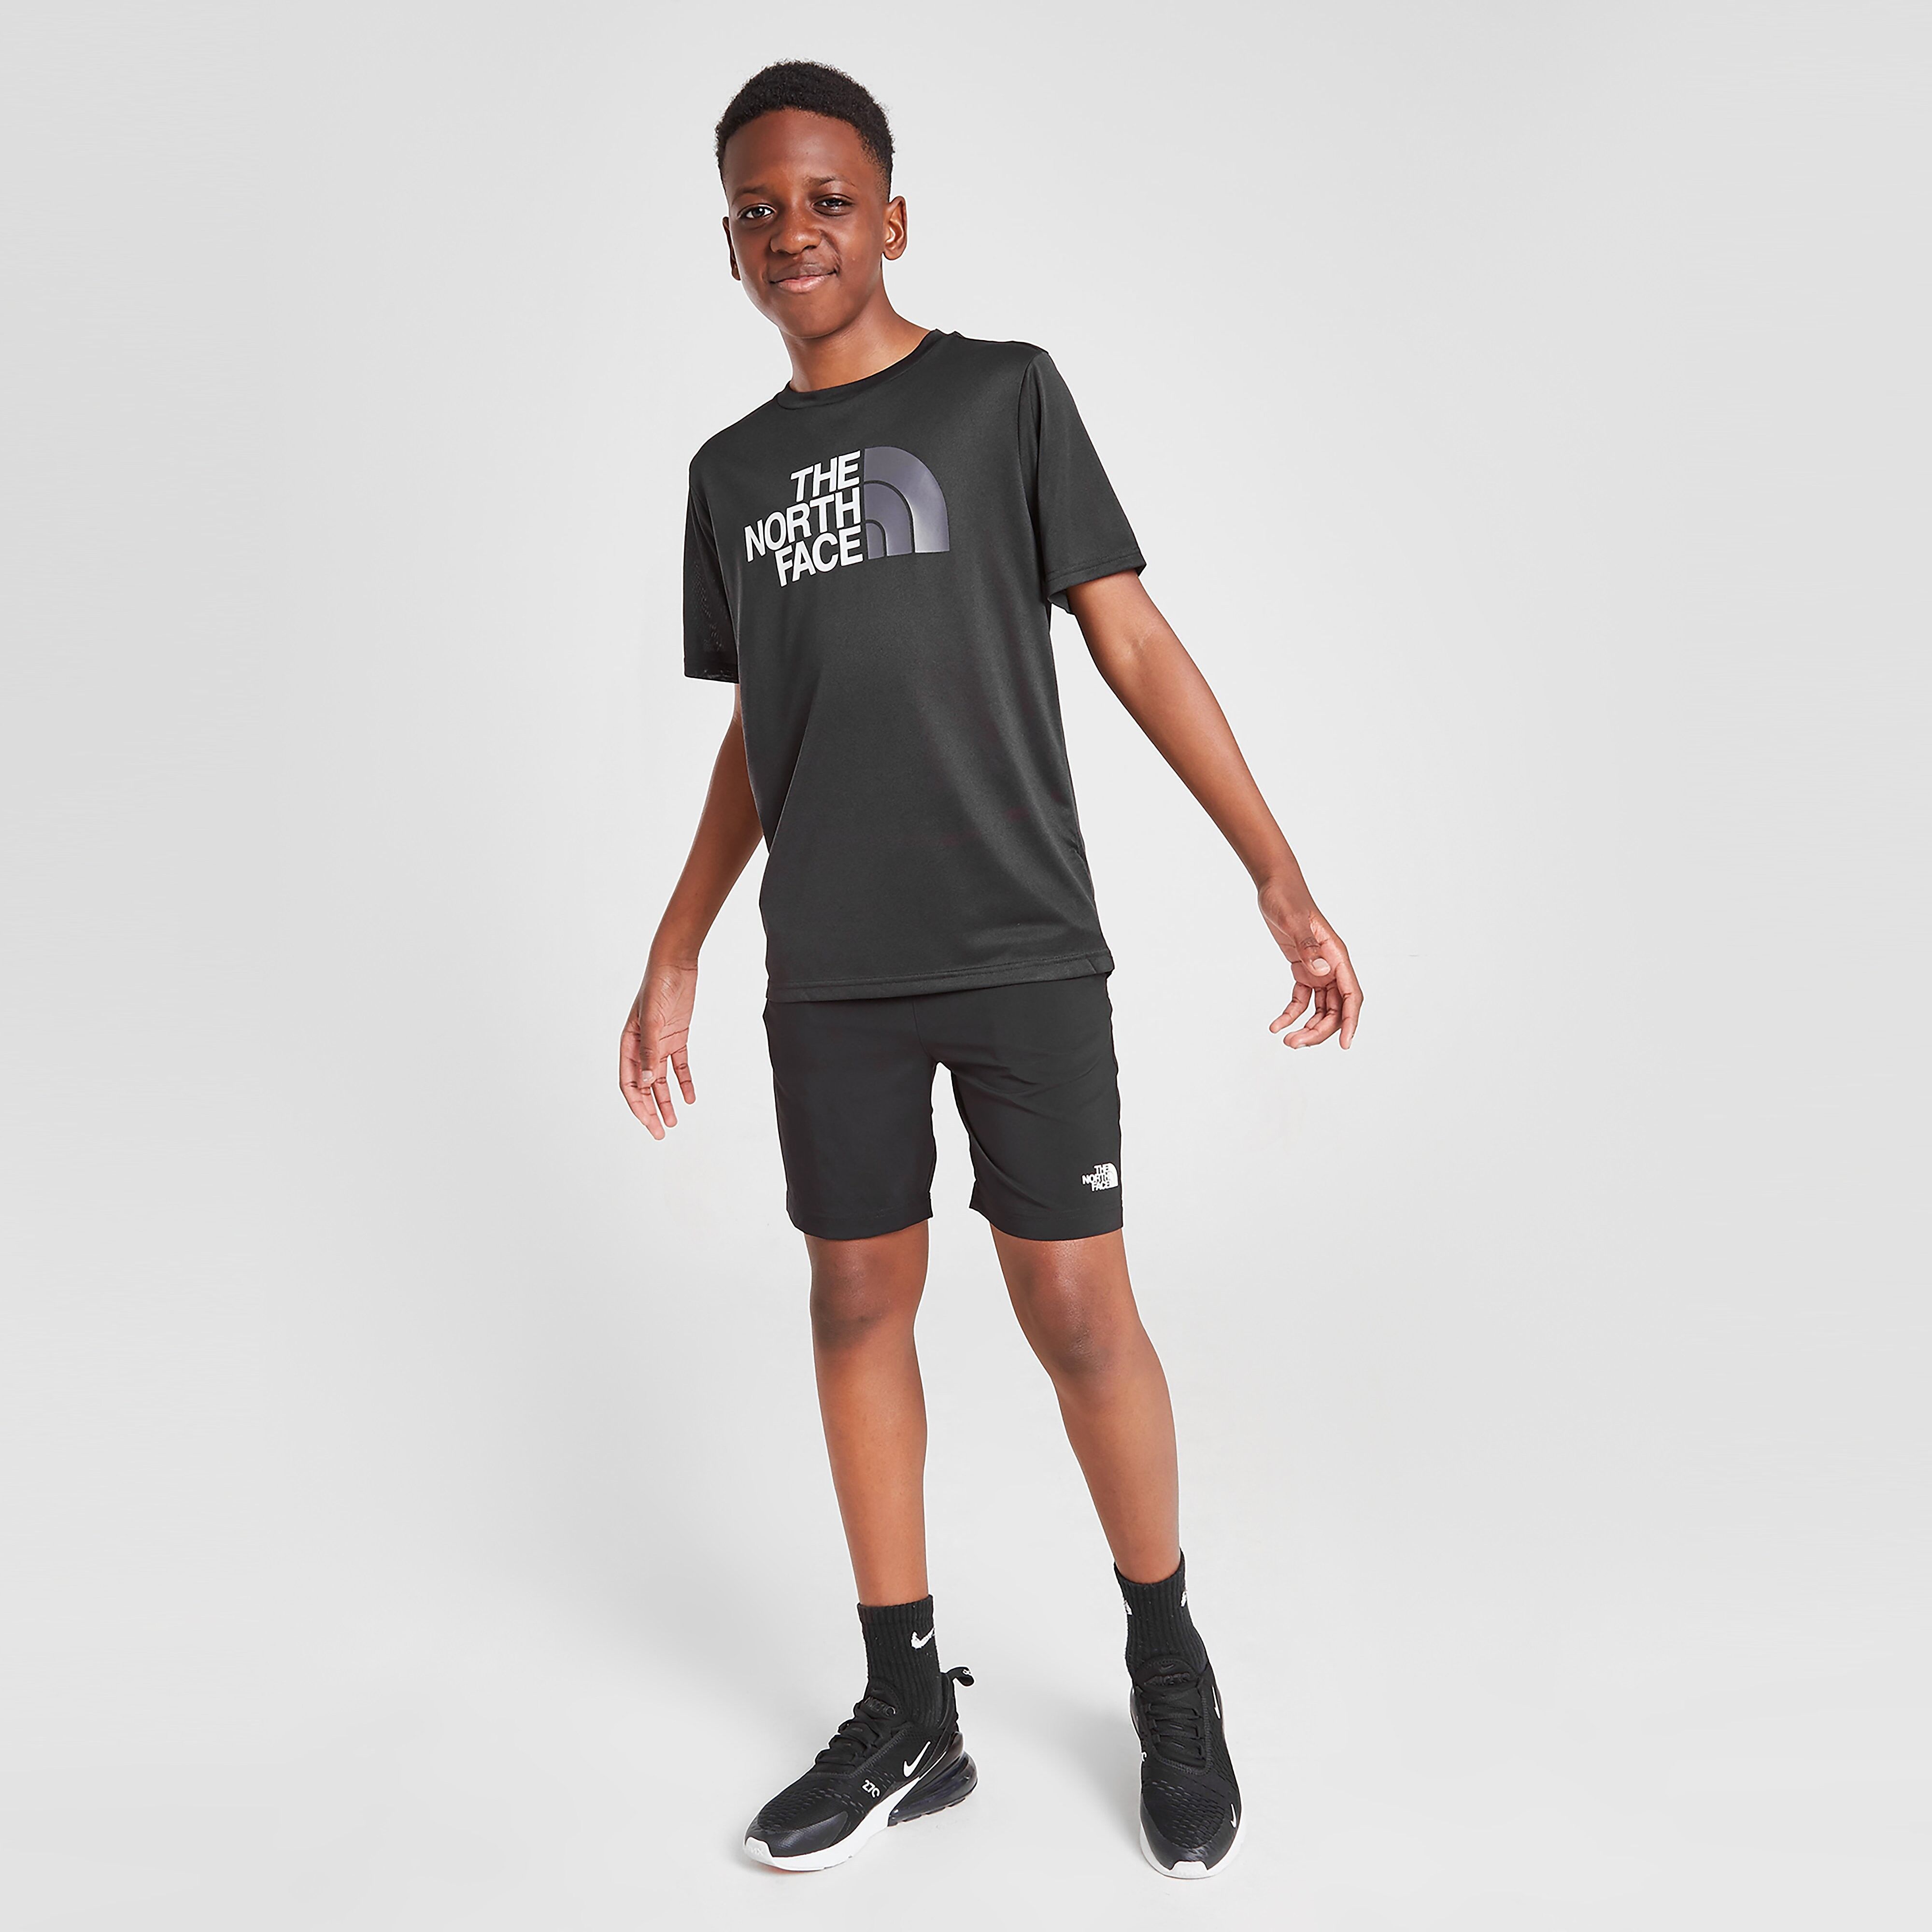 The North Face Reactor Shorts Junior - Black - Kids  size: L